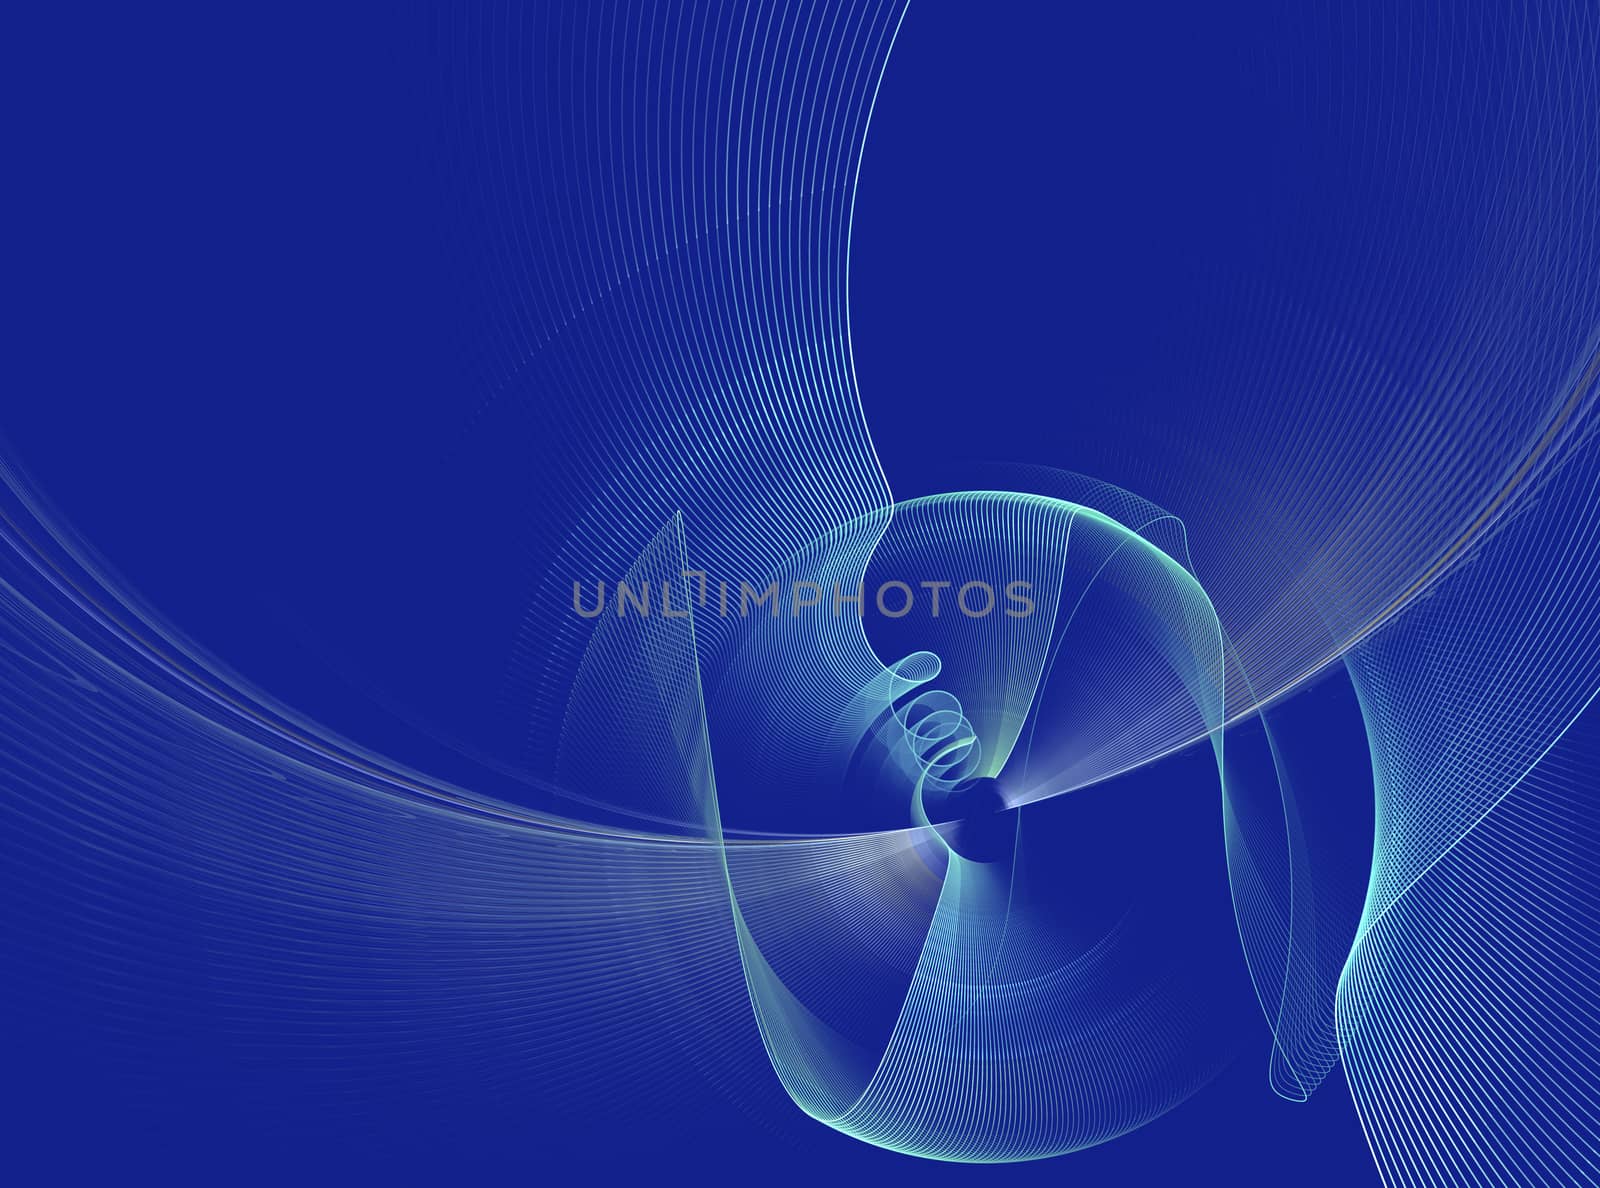 abstract fractal pattern on blue background by Chechotkin